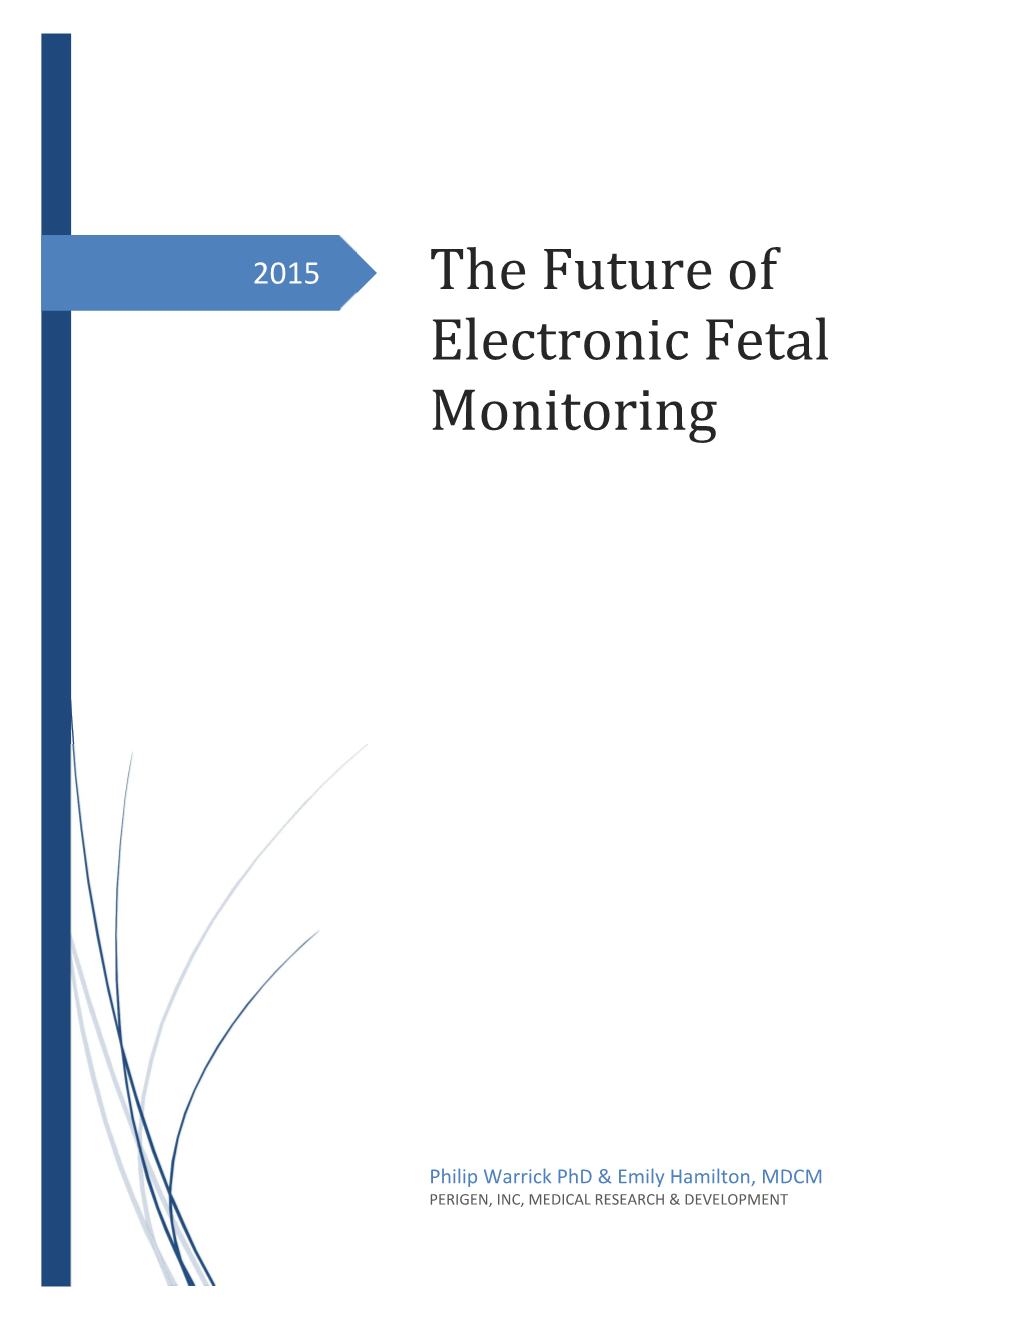 The Future of Electronic Fetal Monitoring